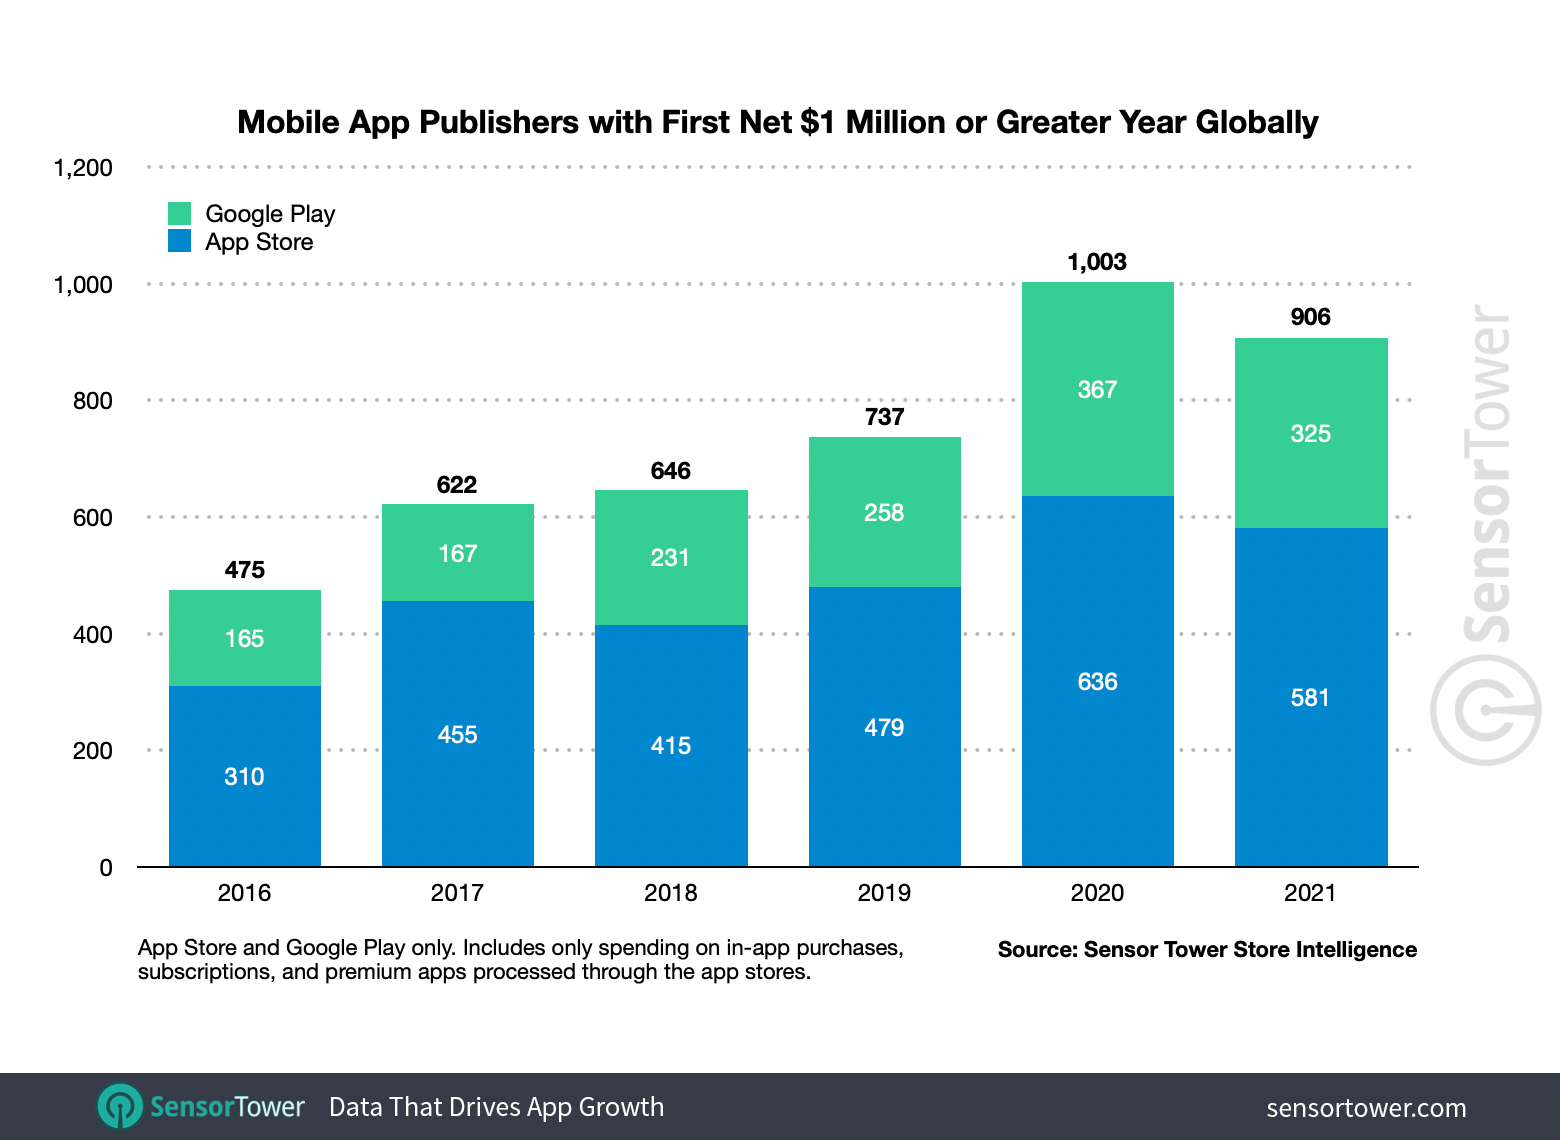 Slightly more than 900 publishers worldwide are projected to surpass $1 million in 2021 on the App Store and Google Play.